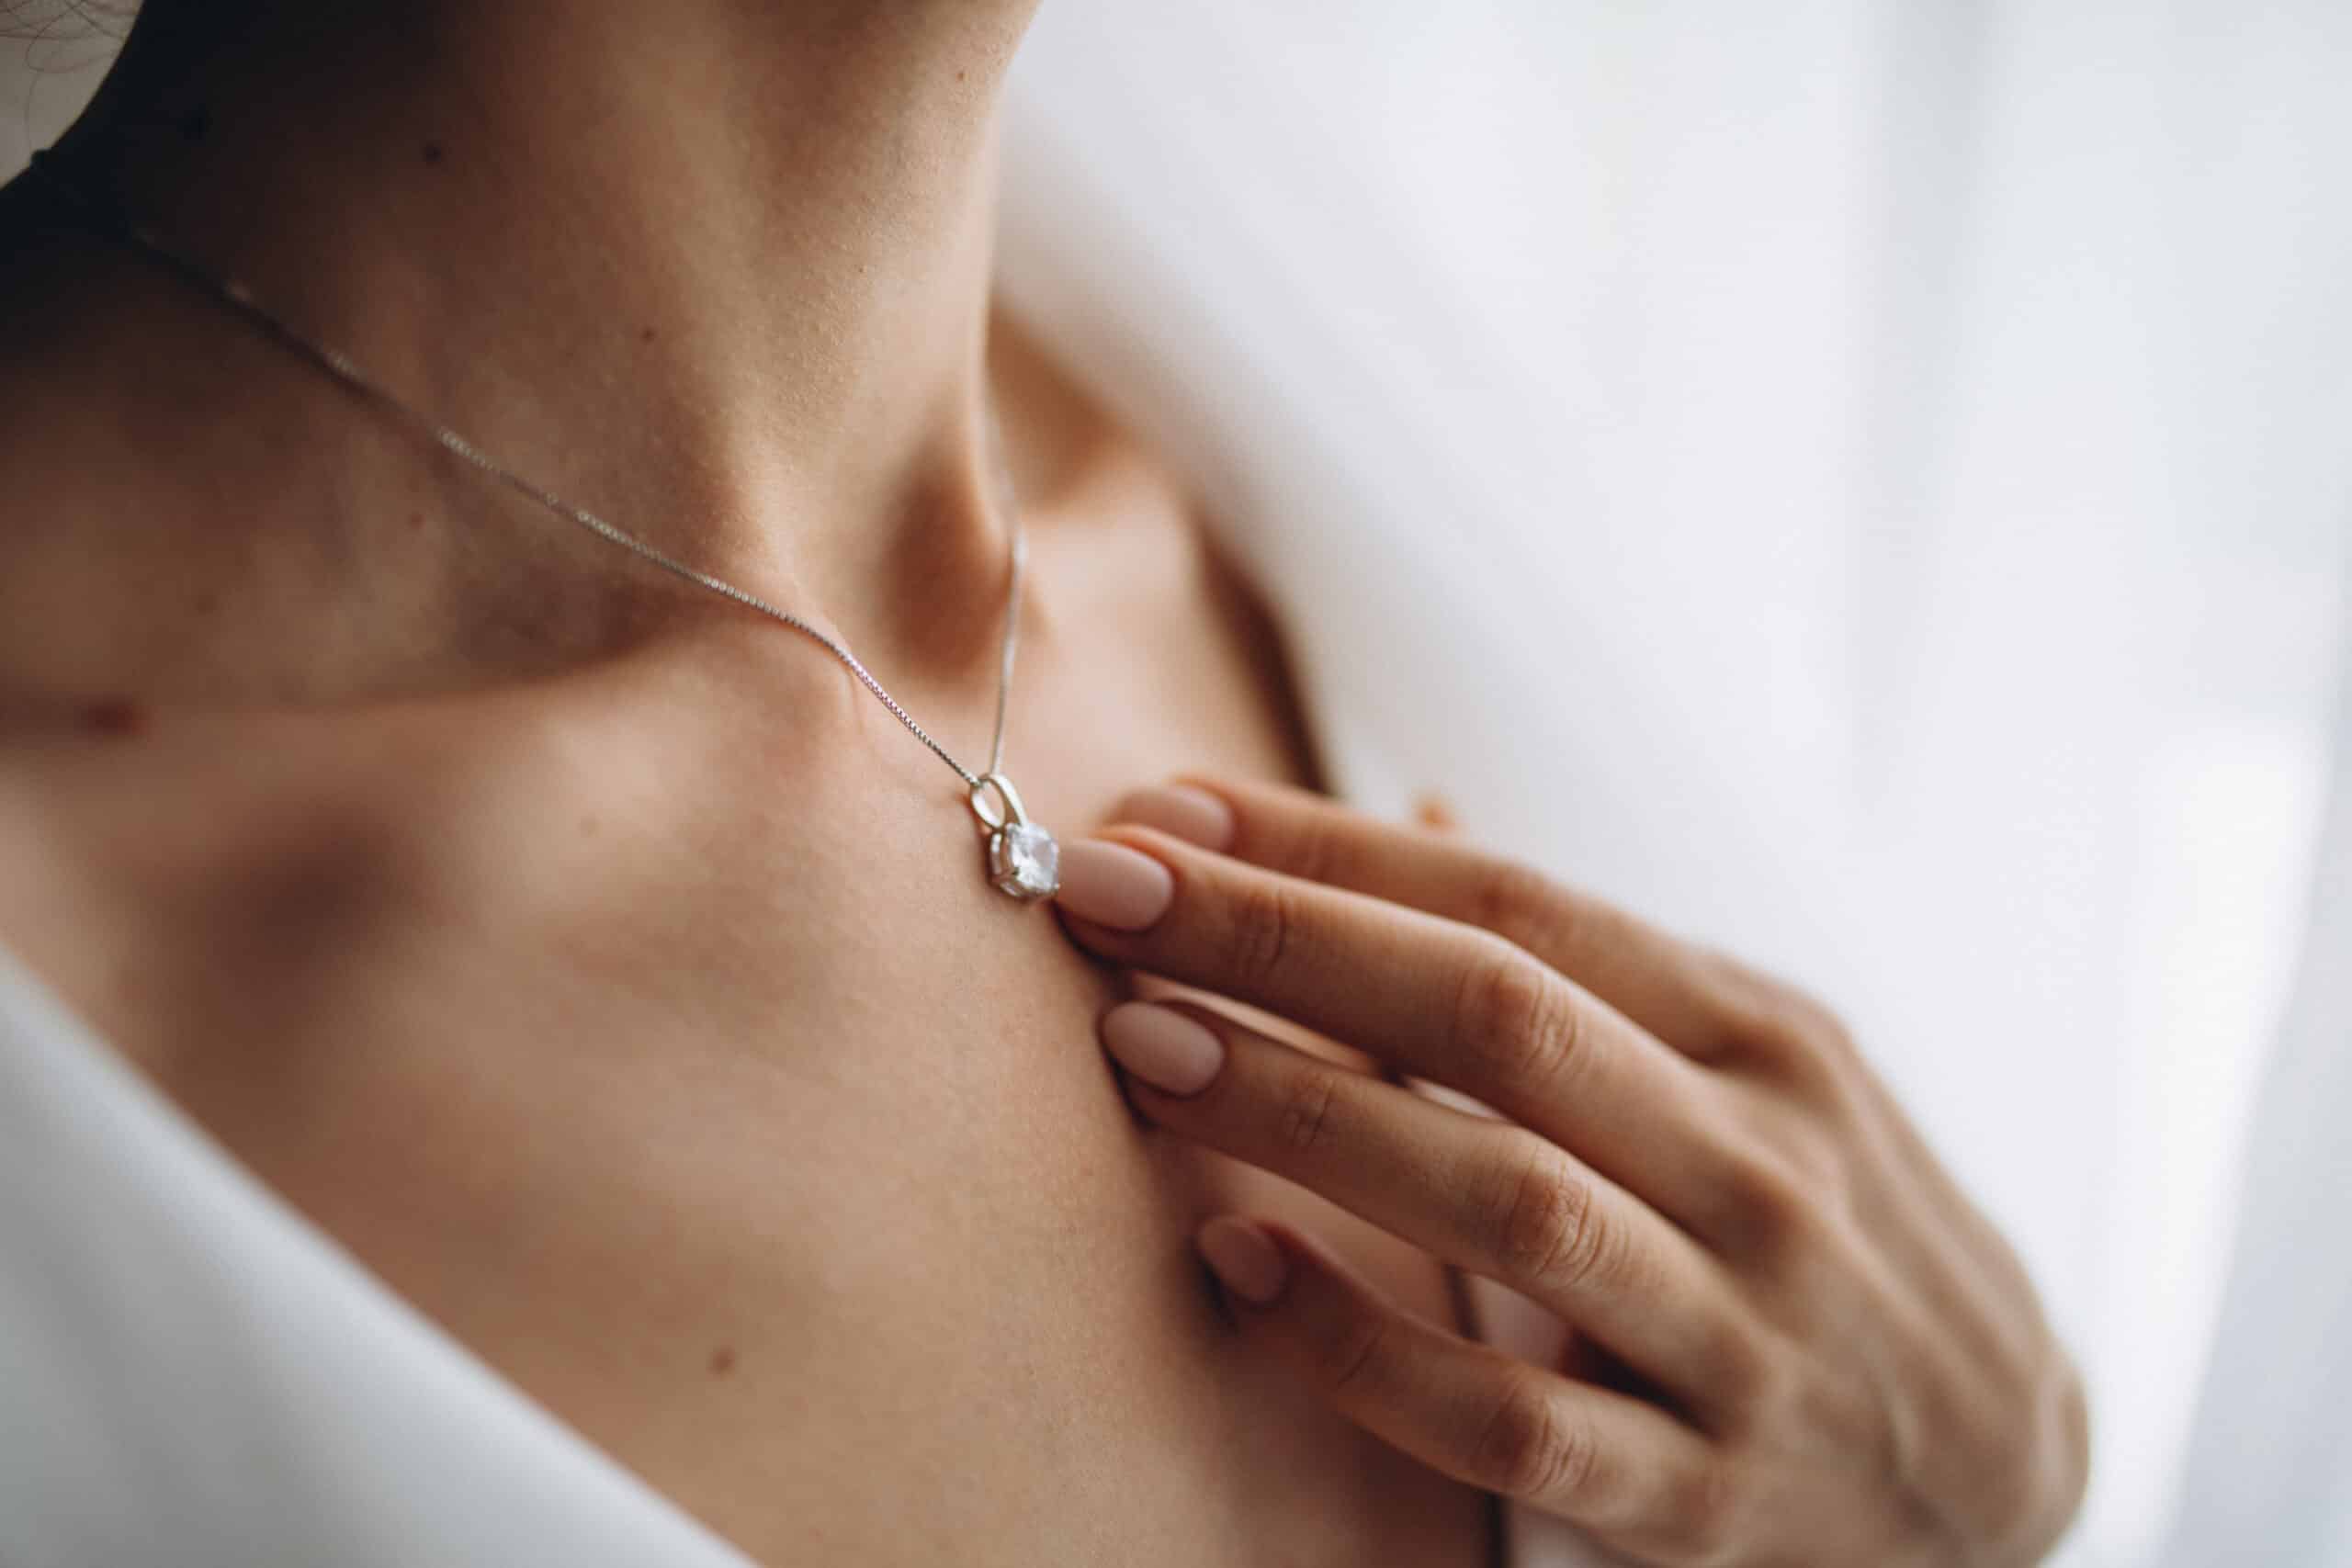 Why You Remove Piercings and Jewelry Before Surgery